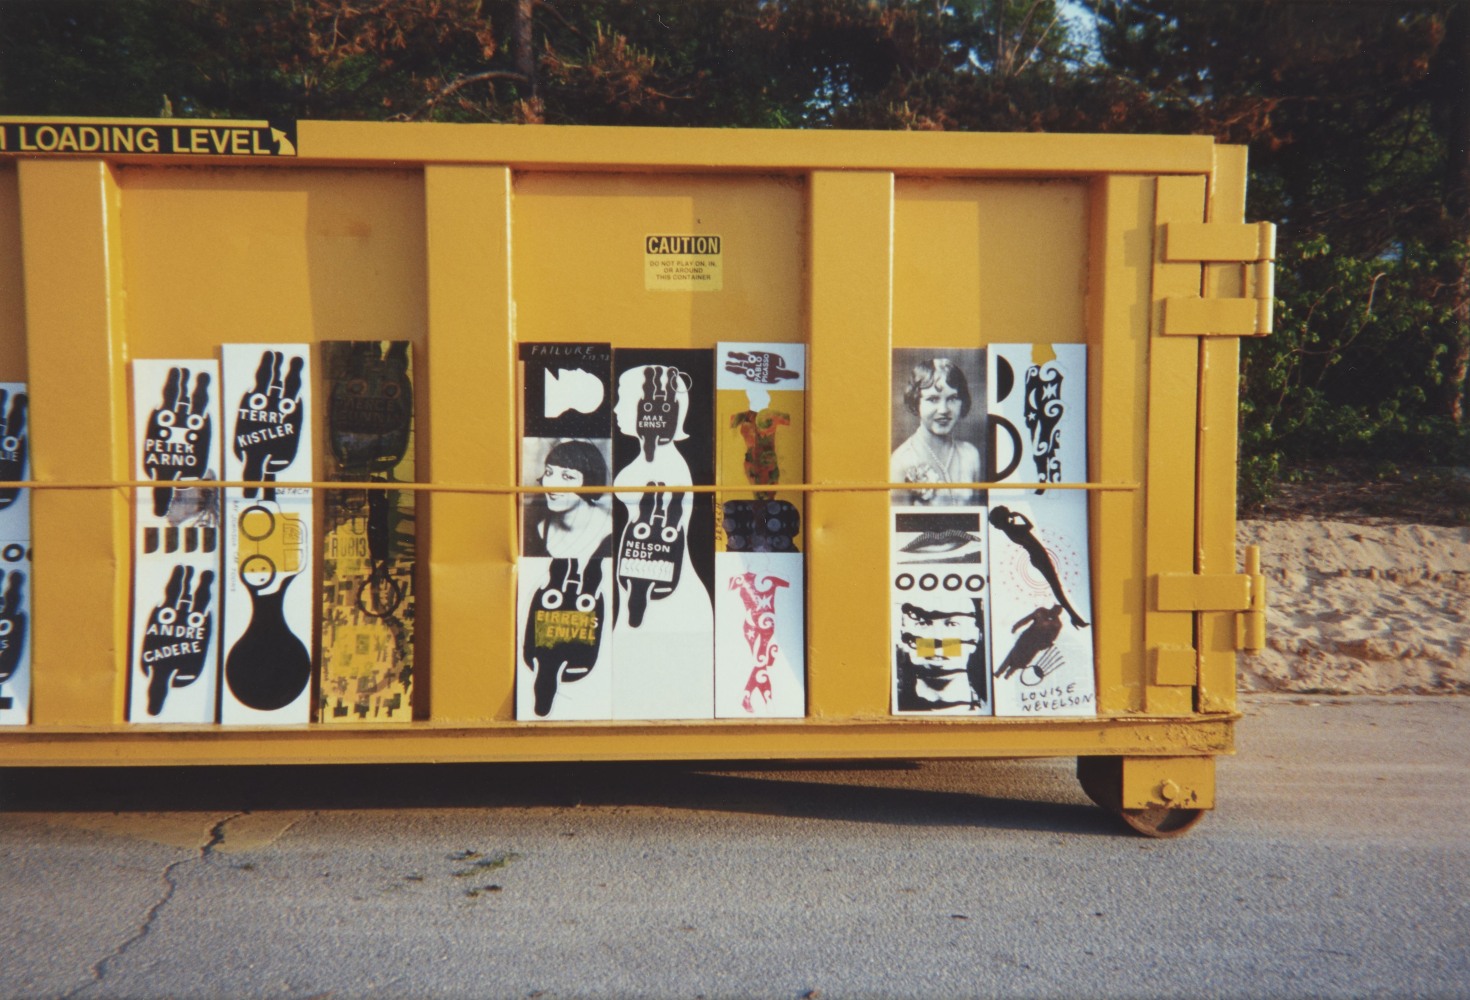 Ray Johnson, Untitled (Outdoor Movie Show on Dumpster), May 18, 1993, Commercially processed chromogenic print, 6 x 4 inches, Collection of The Morgan Library &amp;amp; Museum